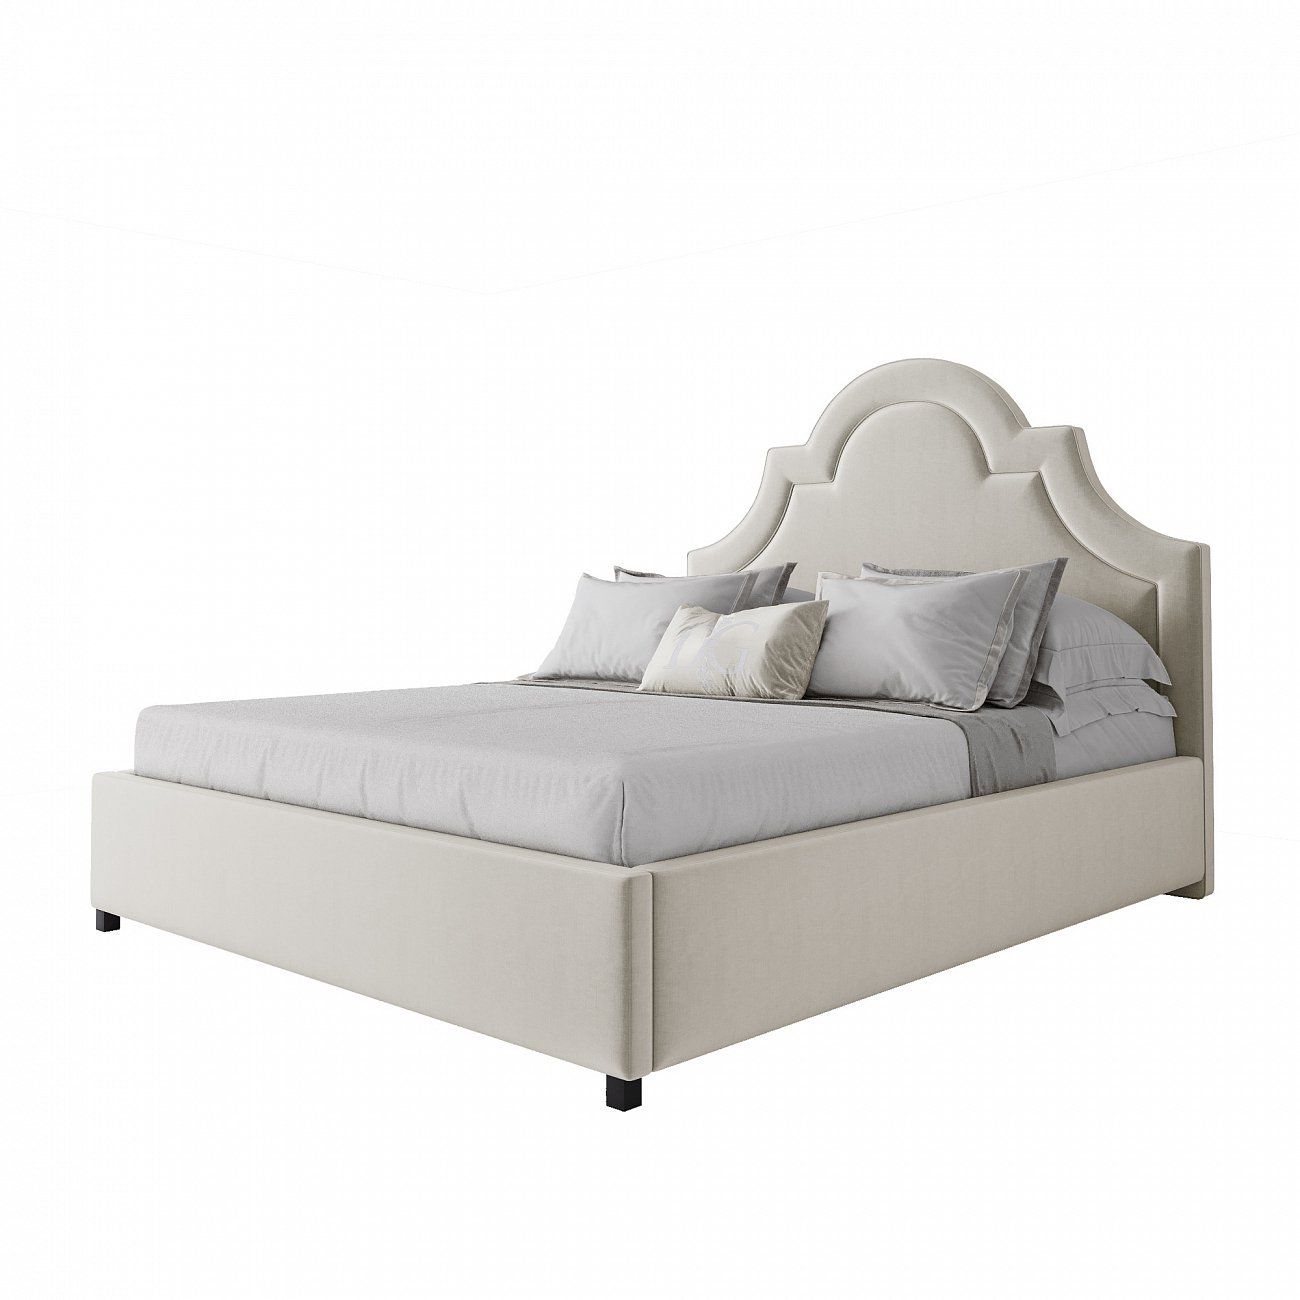 Kennedy Talc double bed 160x200 white